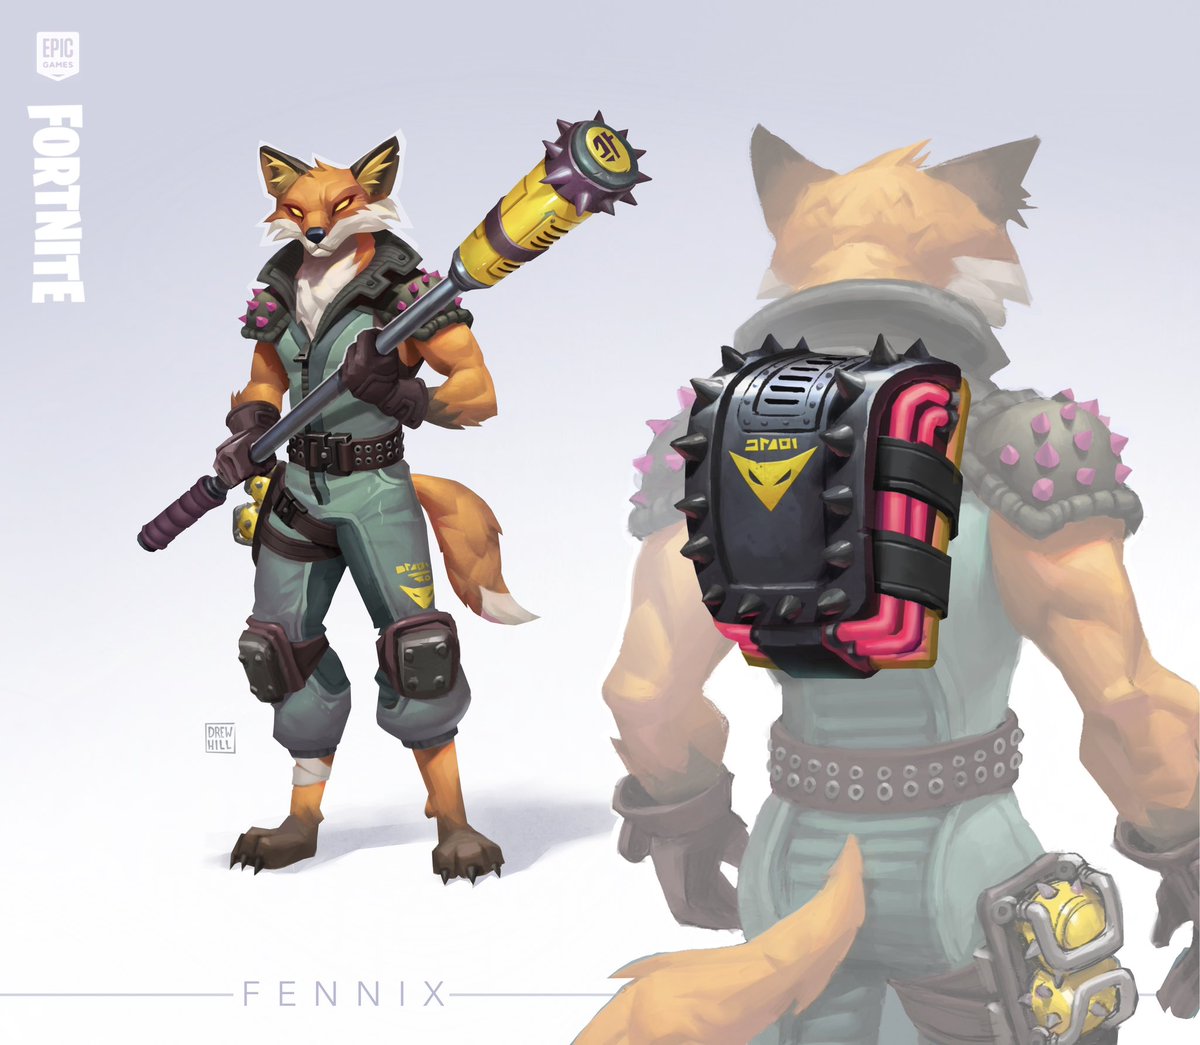 Some more of my Fennix concept art showing his backpack and back view! #fortnite #FortniteArt #conceptart